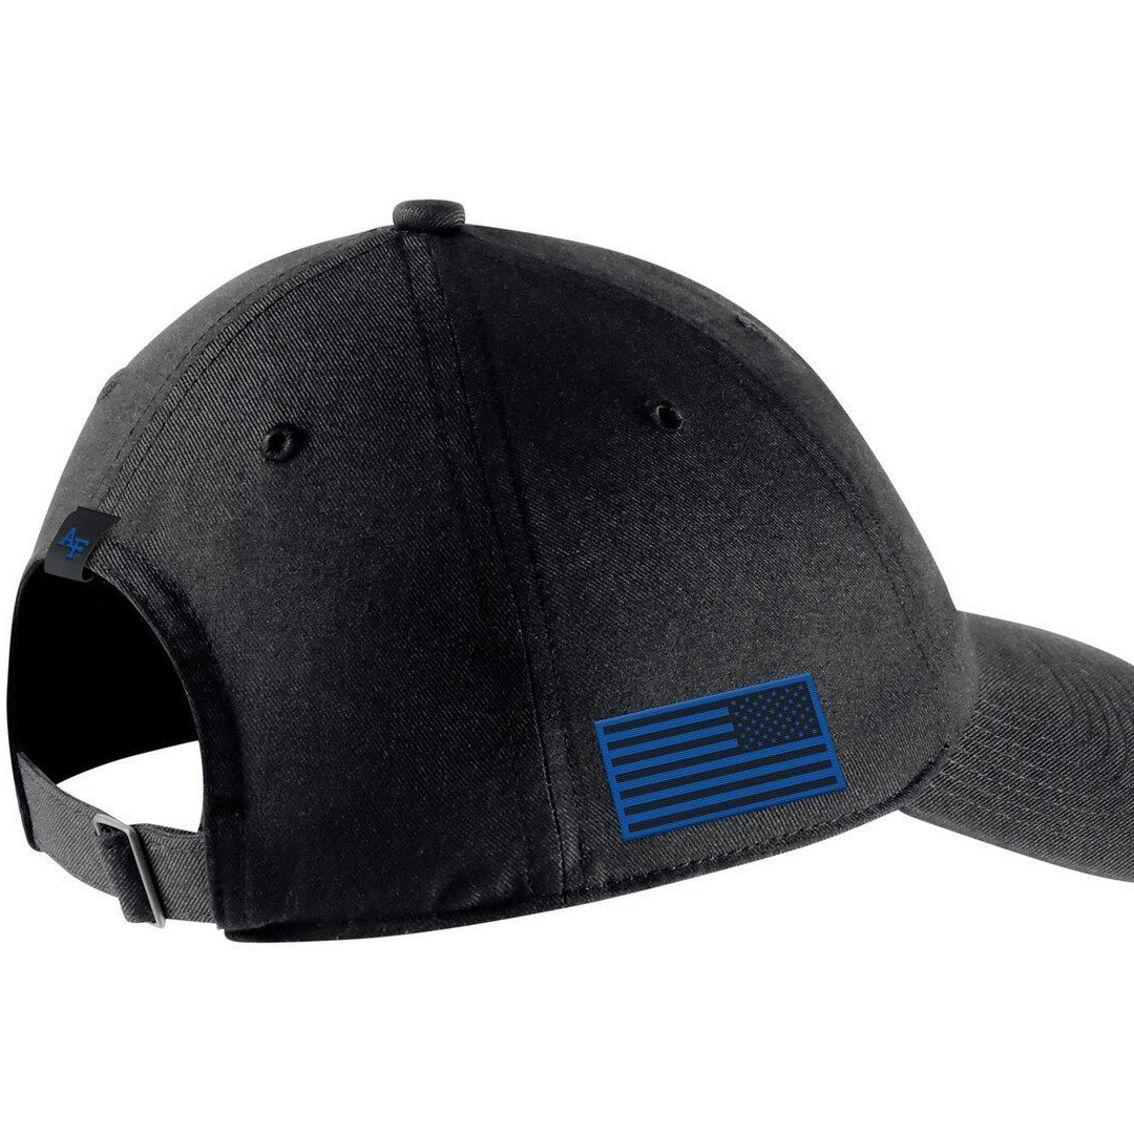 Nike Men's Black Air Force Falcons Space Force Rivalry L91 Adjustable Hat - Image 3 of 3